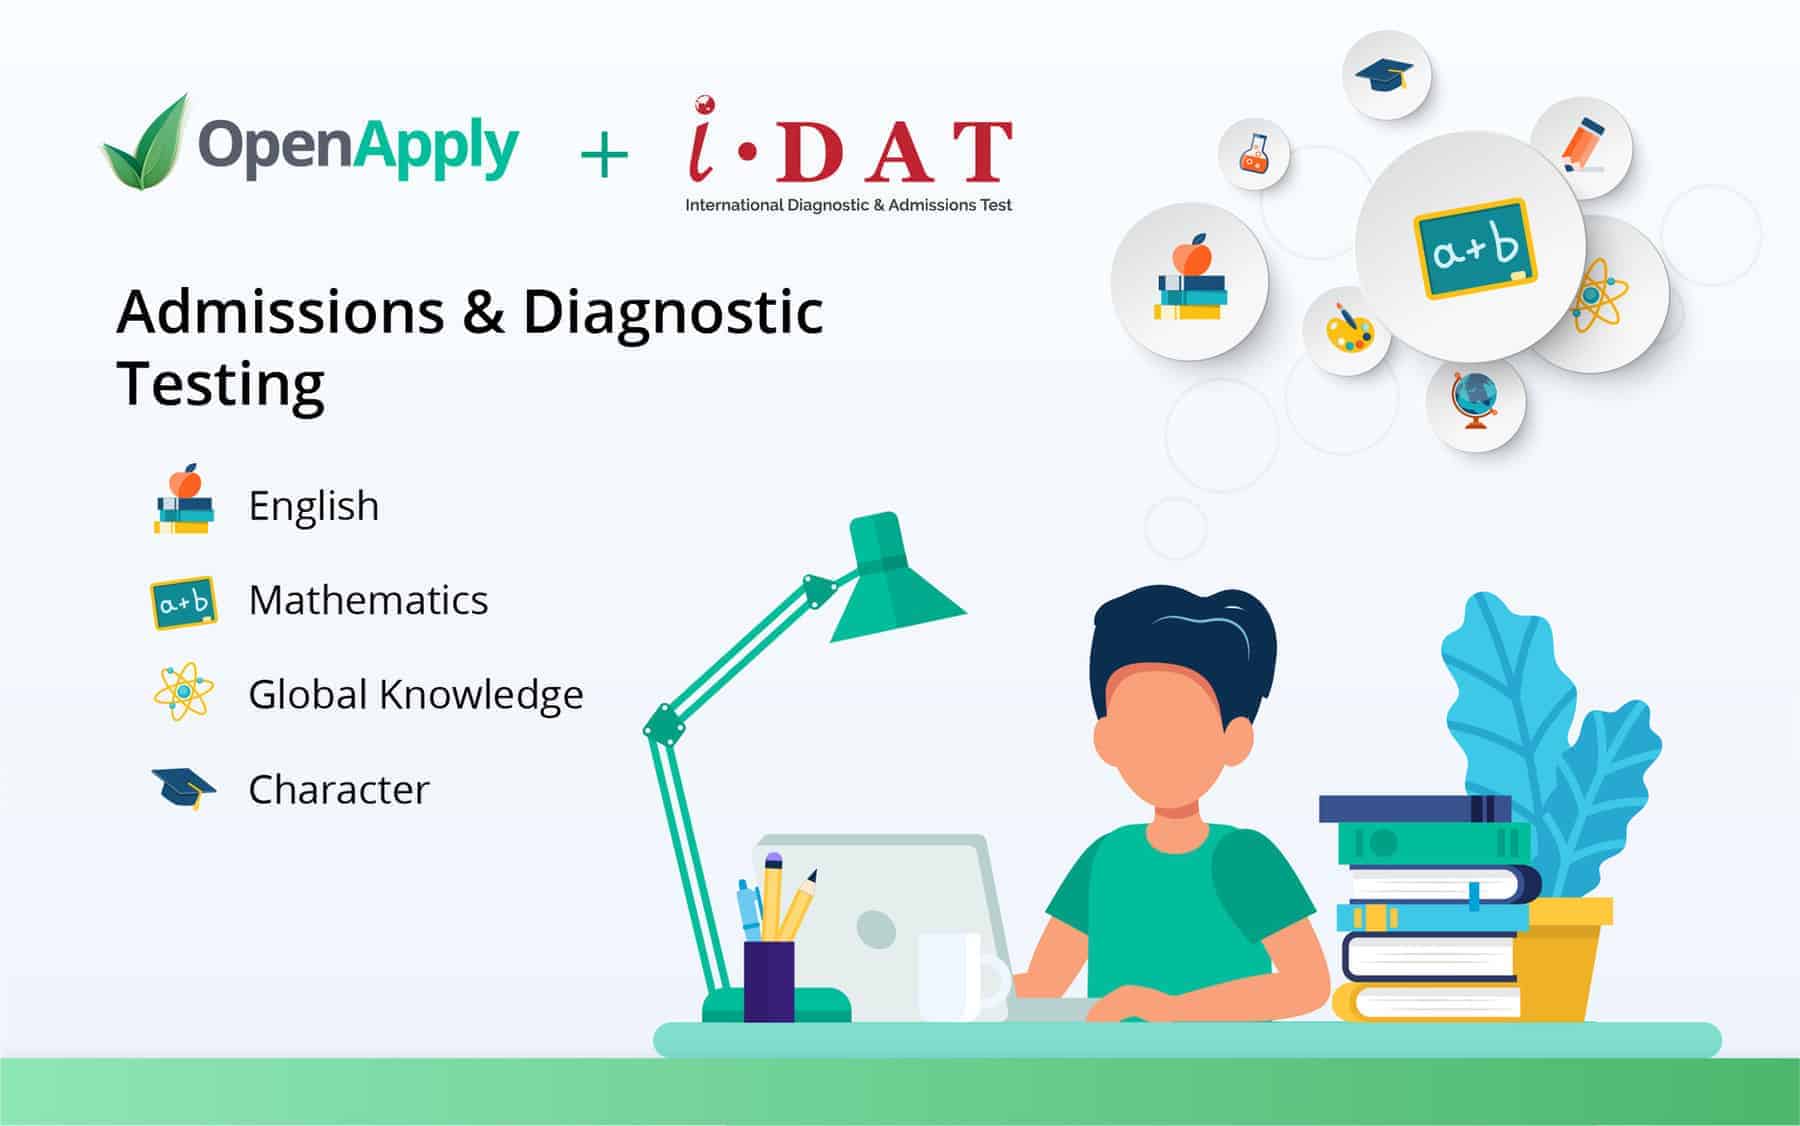 Admissions & Diagnostic Testing with OpenApply and IDAT